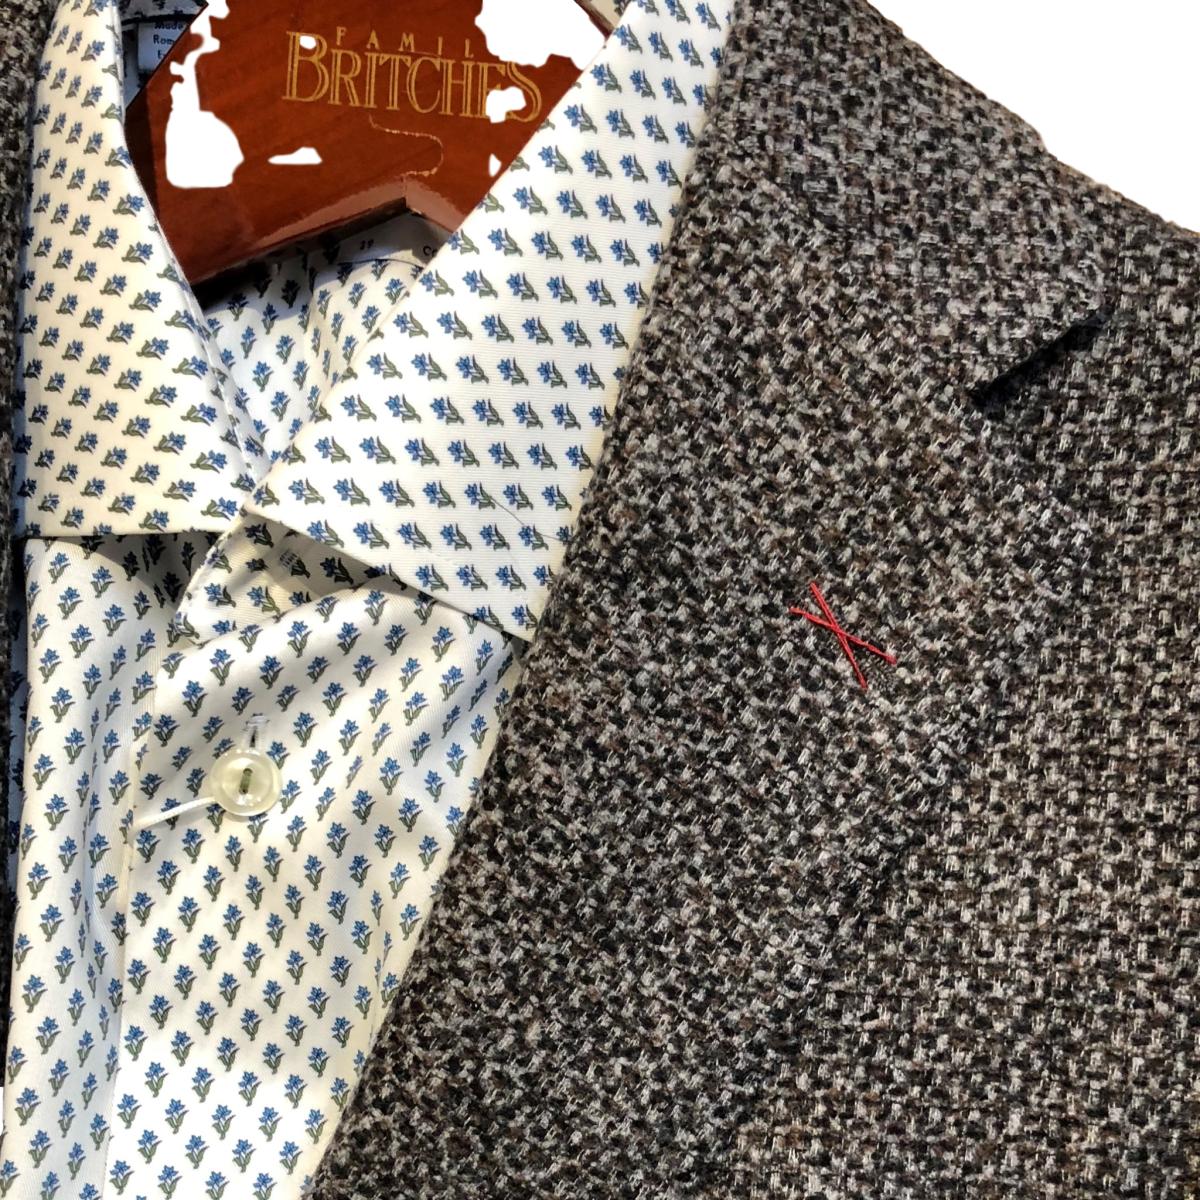 Tweed Sport Jacket Made in Canada - Family Britches